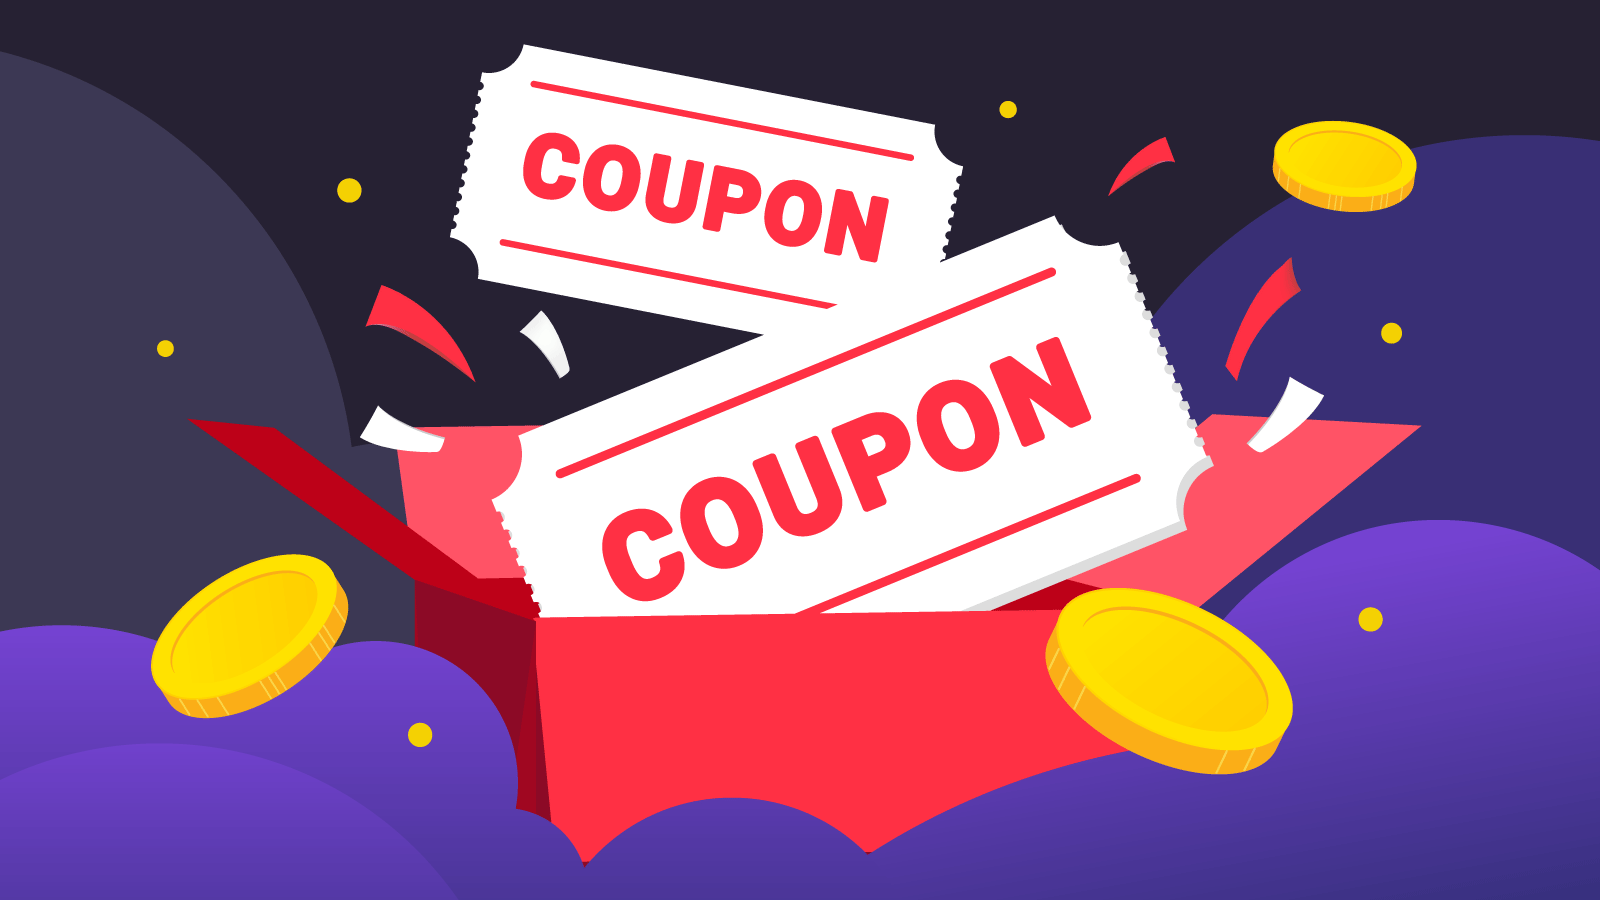 Using Coupons Makes You Buy Things You Don't Need! (Couponing Myth